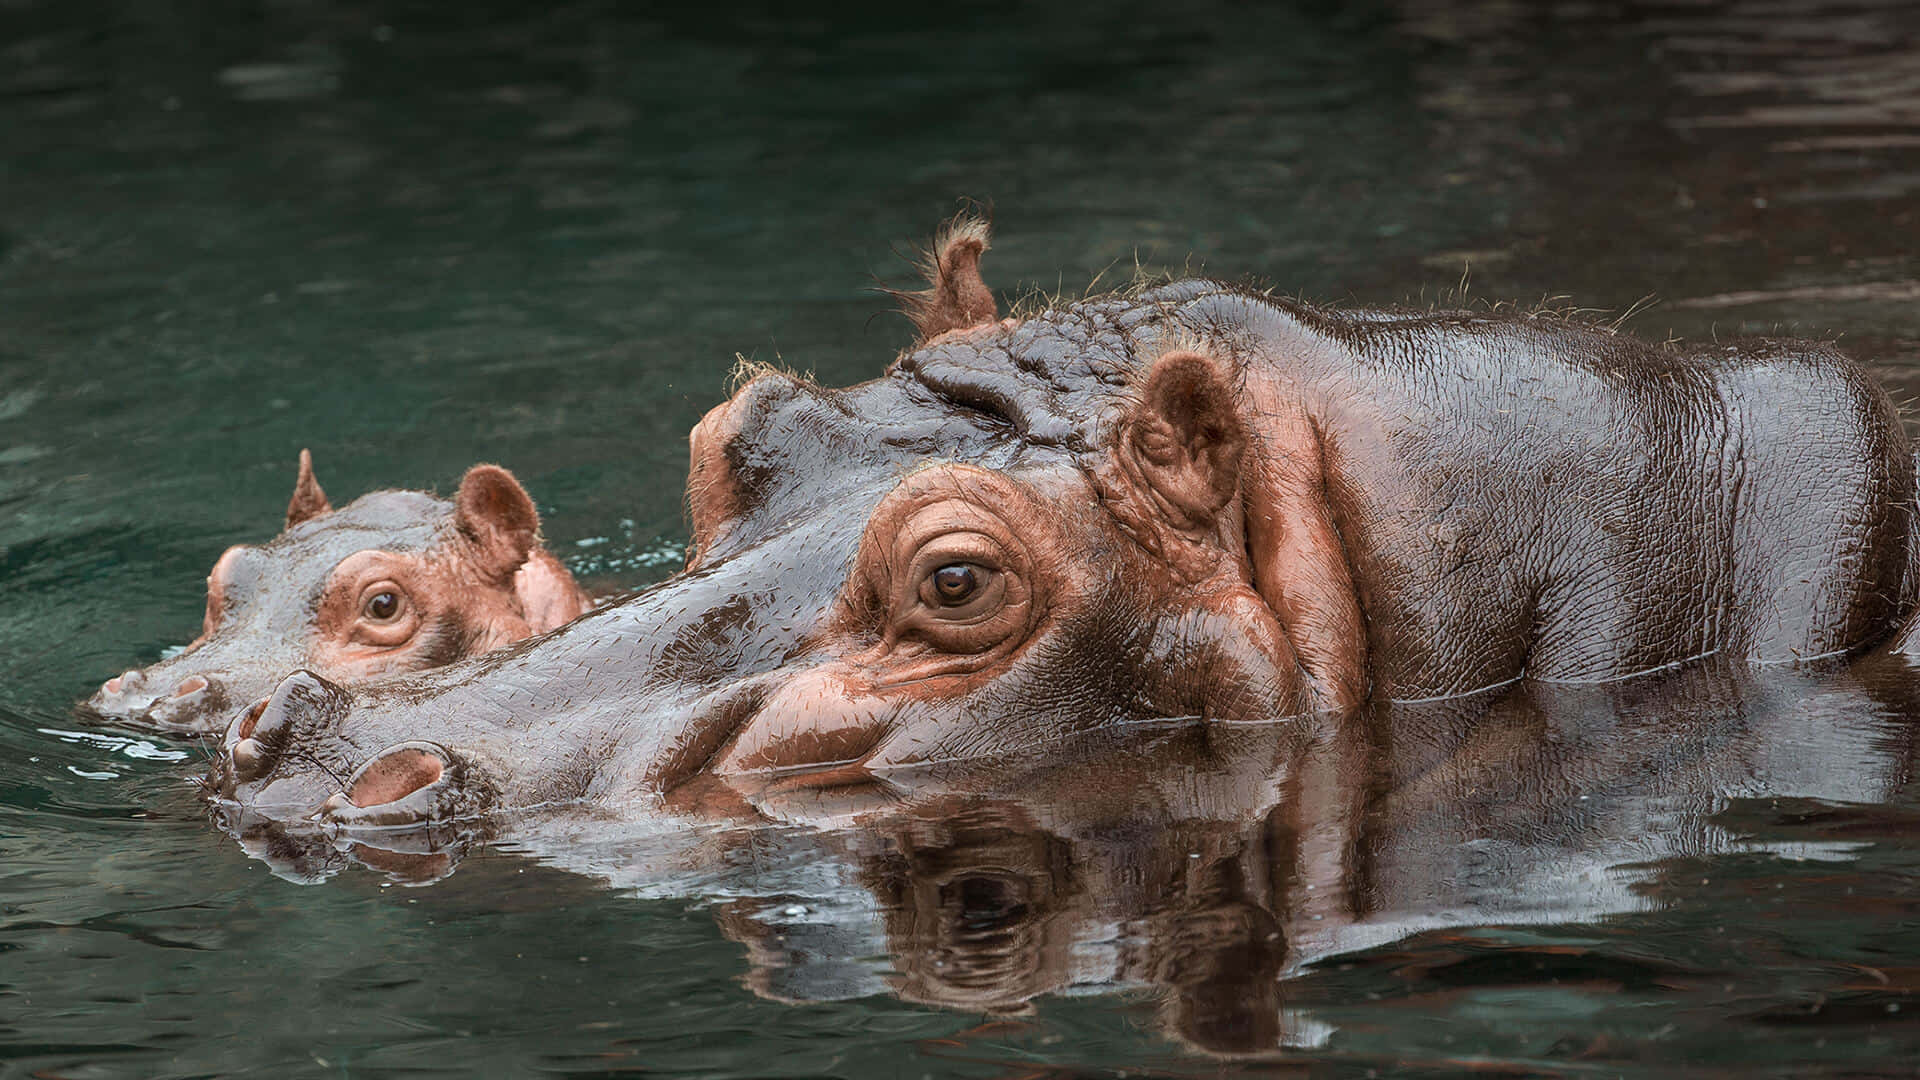 A massive hippo cooling off in a lake.